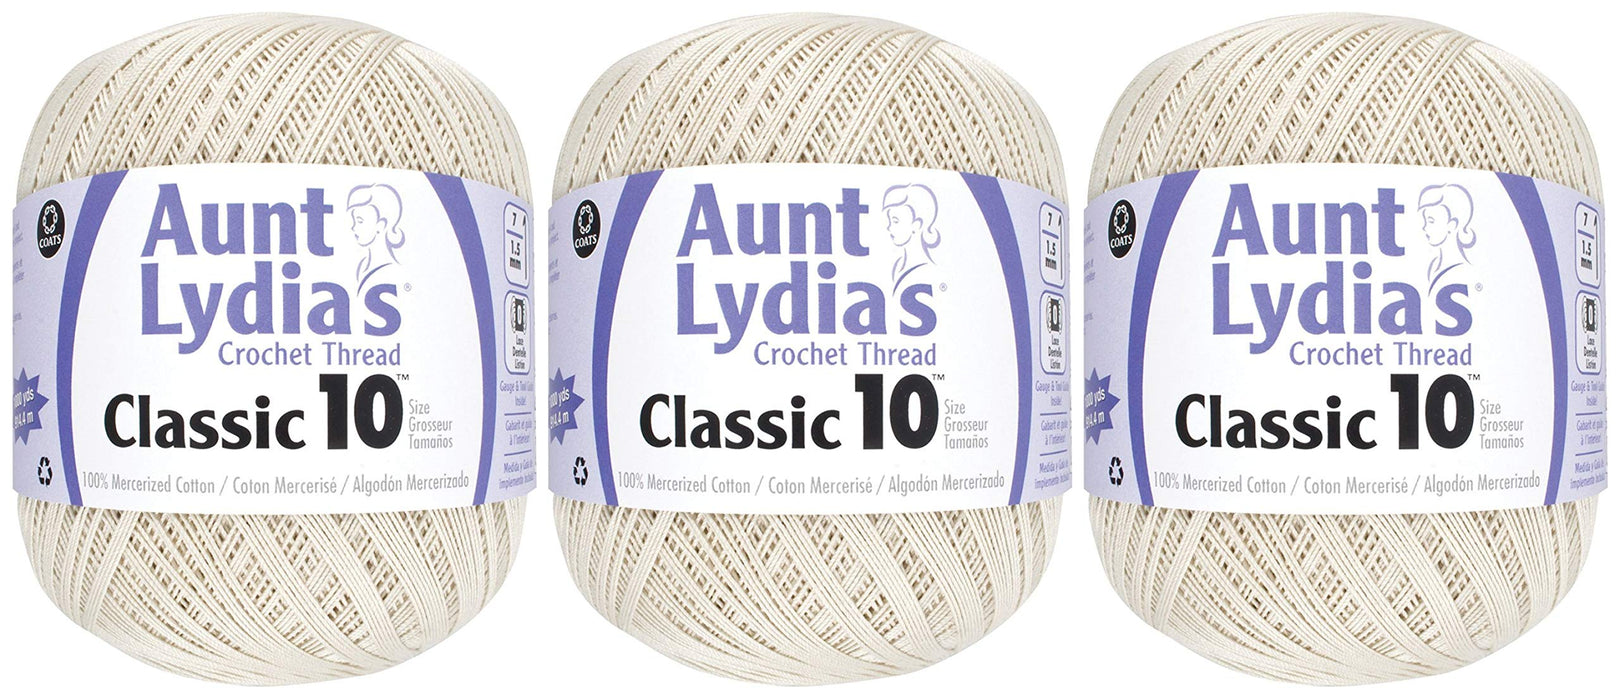 3-Pack - Aunt Lydia's Classic Crochet Thread - Natural - Size 10 Value Pack - 1000 Yards Each